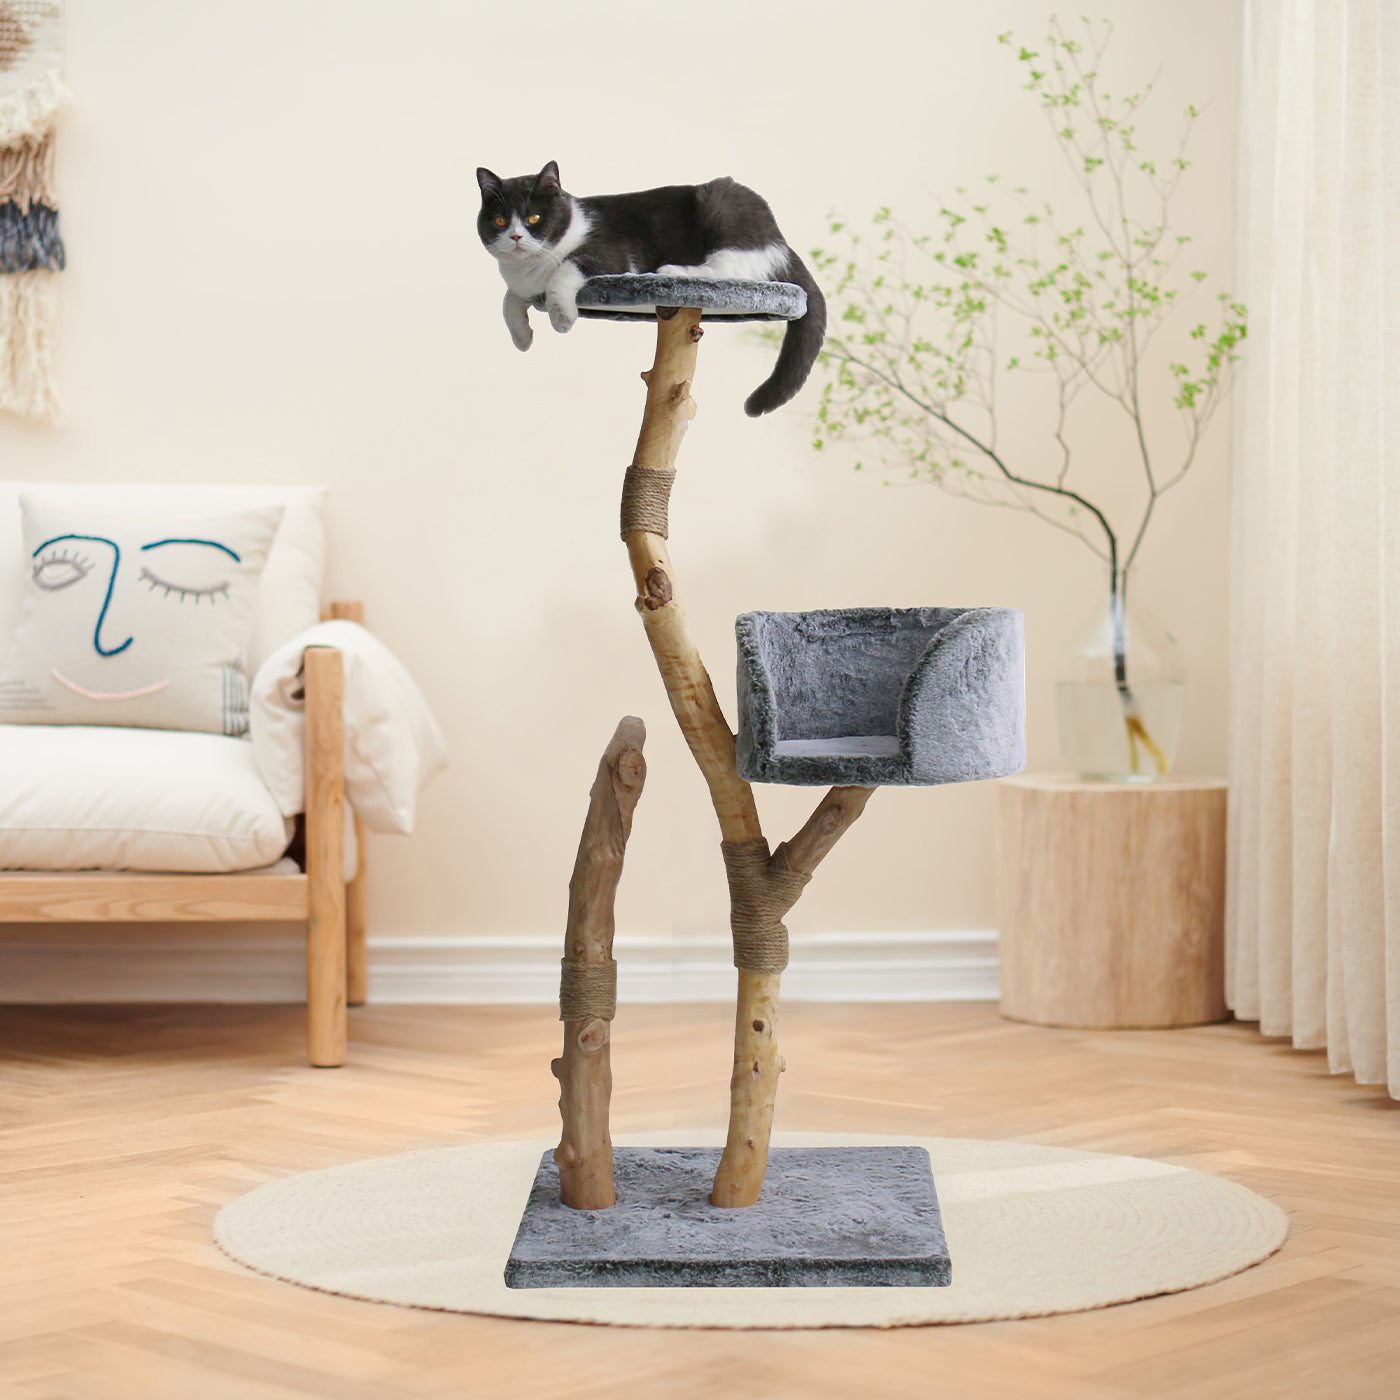 Discover our Luxury Back to Nature The Trio Cat Scratch Post. Features High Sided Cosy Platforms For Kittens and Cats To Rest, Made From Thick Natural Wood Perfect For Scratching! Available Now at Lords & Labradors